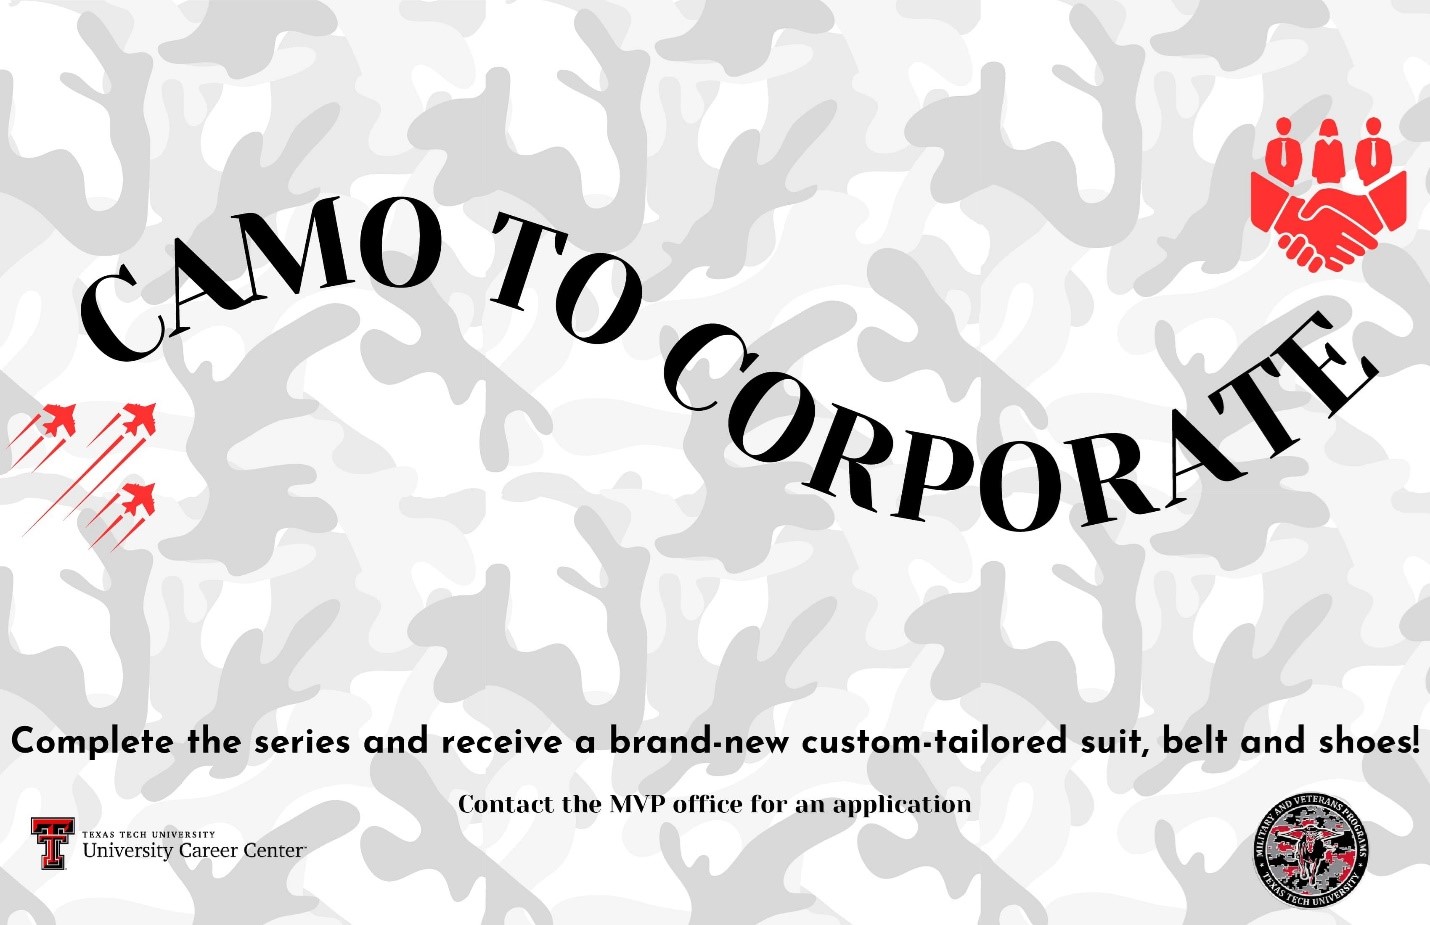 Text: Camo to Corporate. Complete the series and receive a brand-new custom-tailored suit, belt and shoes. Contact the MVP office for an applicationround